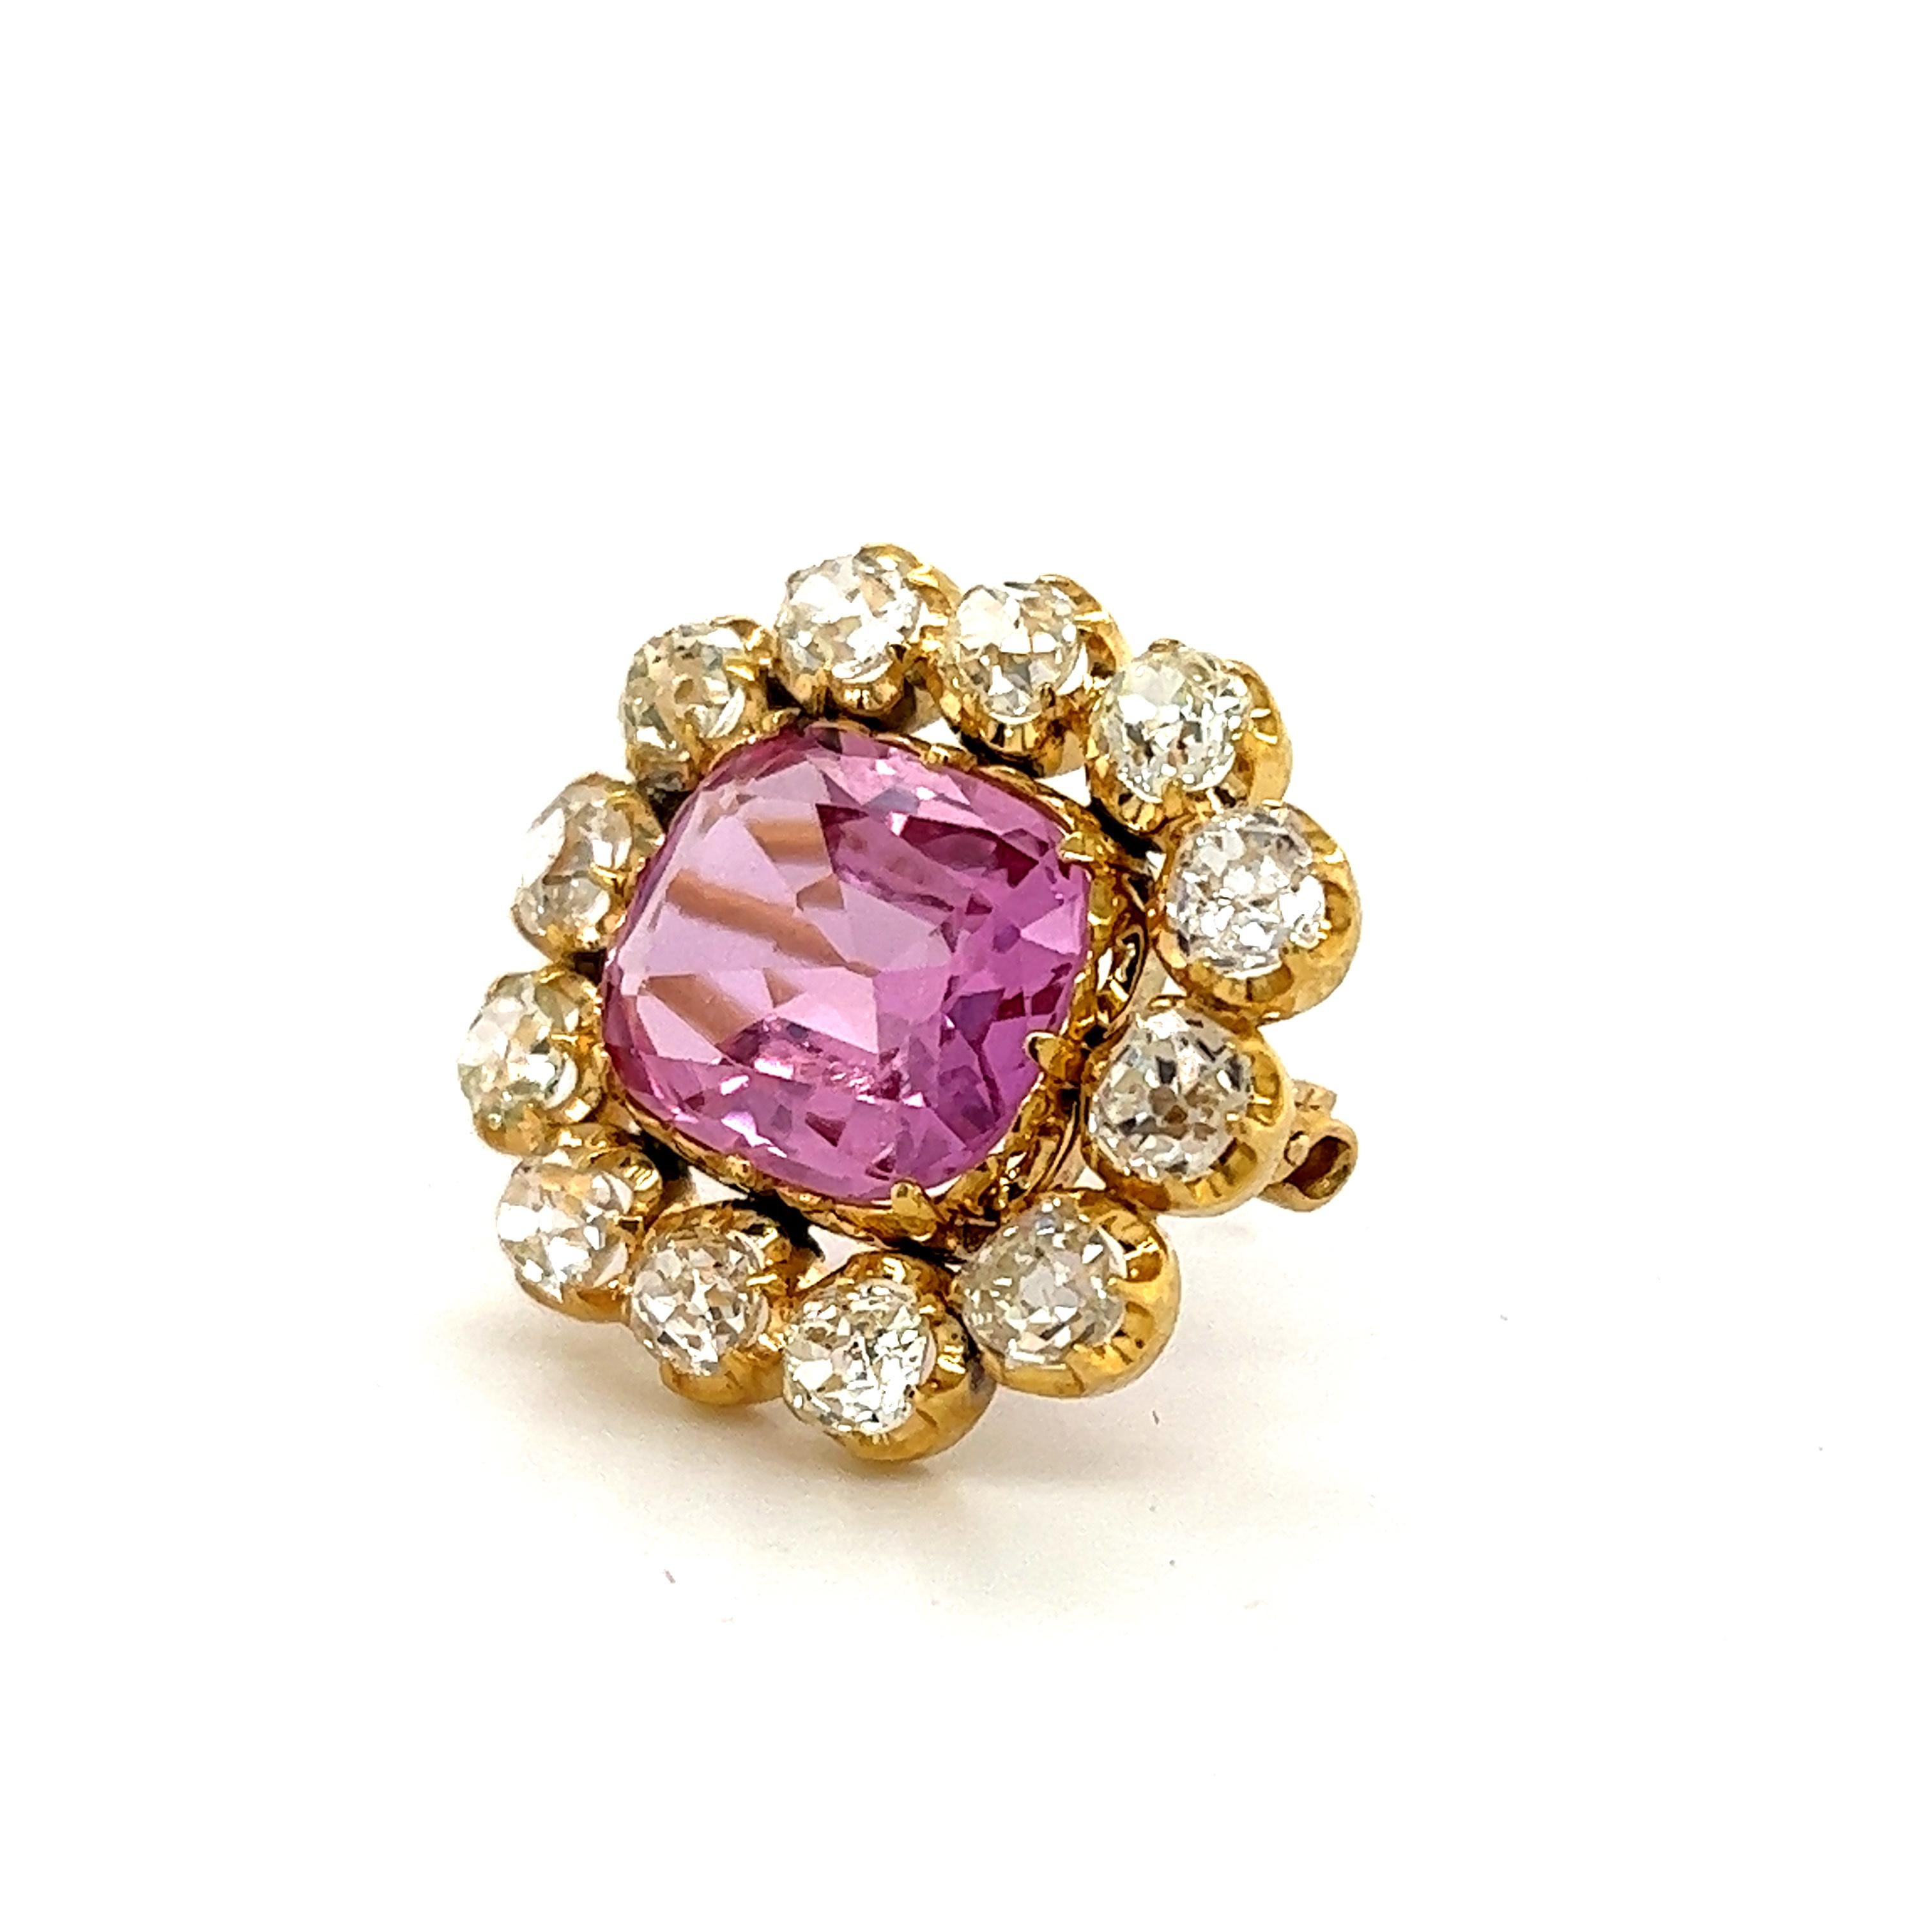 Beautiful Victorian brooch crafted in 18k yellow gold. The brooch is set with one Pink Topaz gemstone, known in the trade as Imperial Topaz. The gemstone displays a vibrant pink color and and pops off the yellow gold design. To find a natural pink